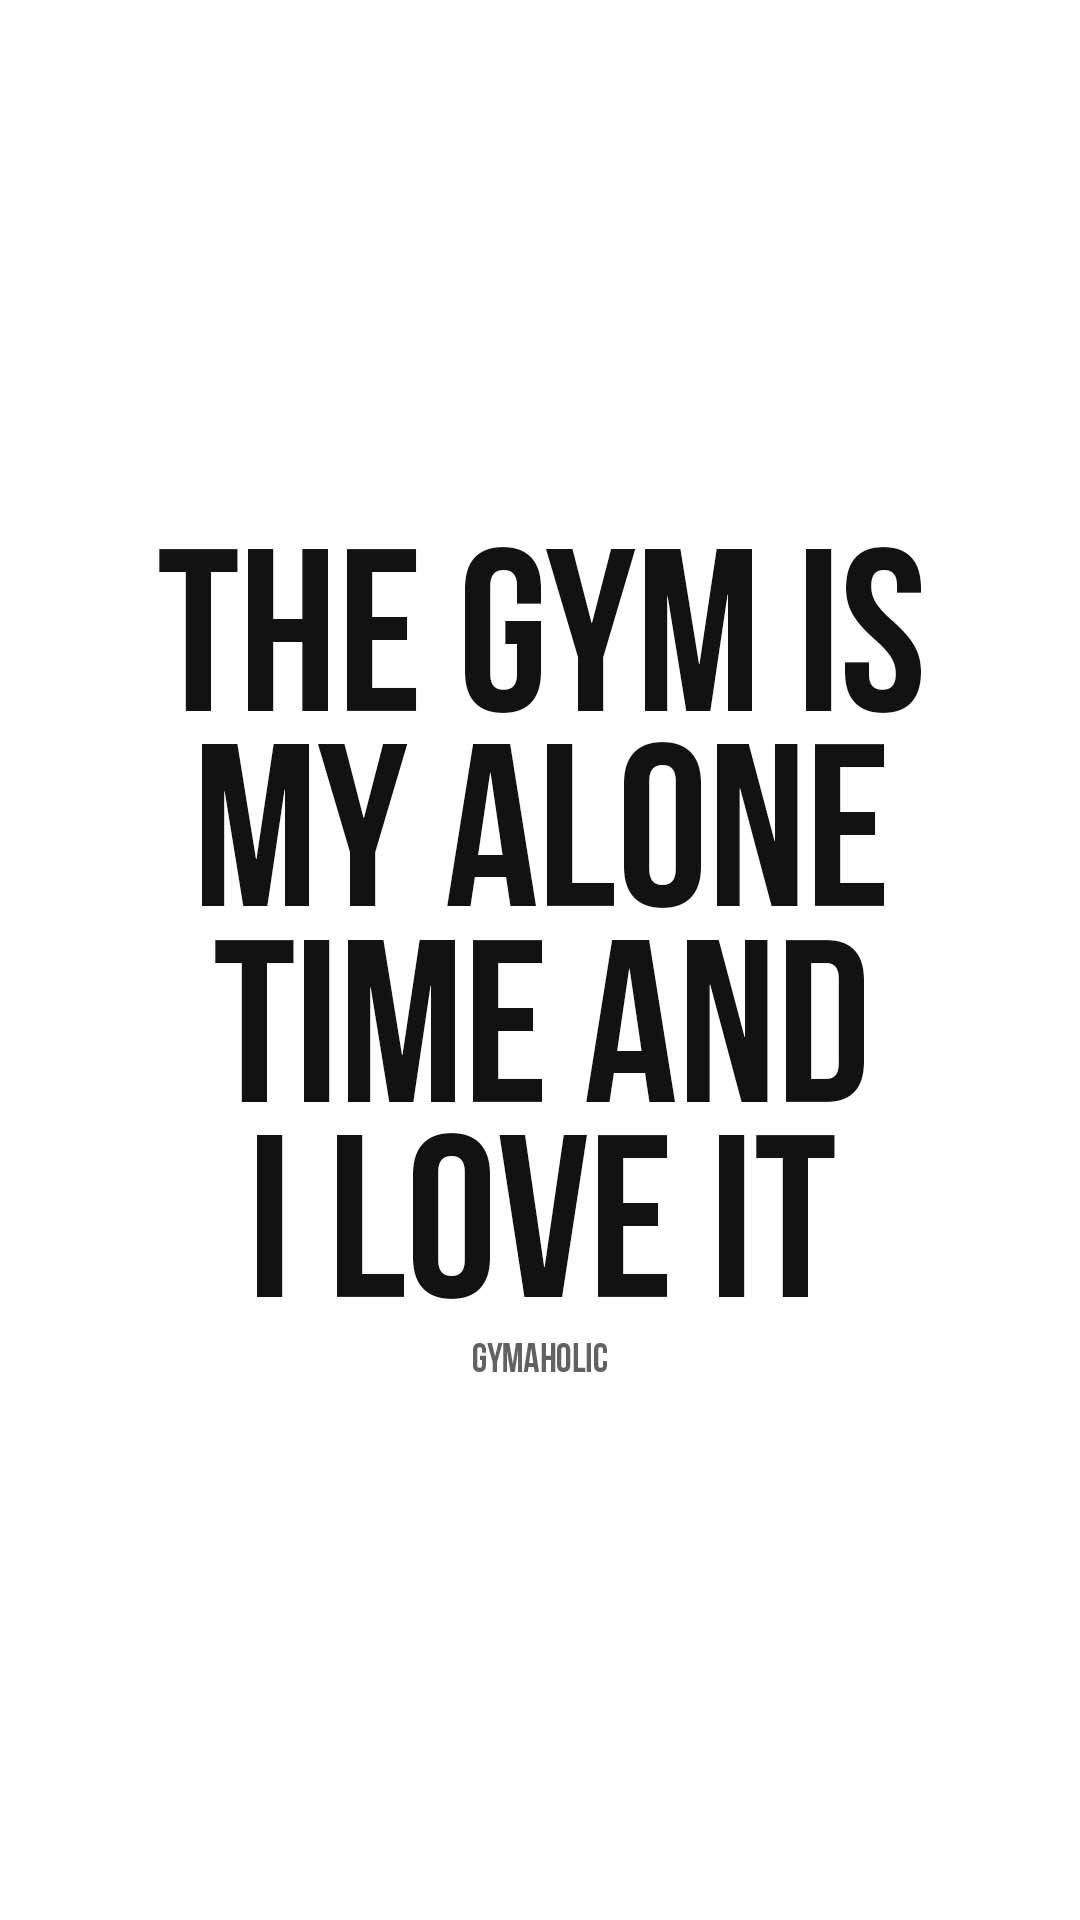 The gym is my alone time and I love it #gymaholic